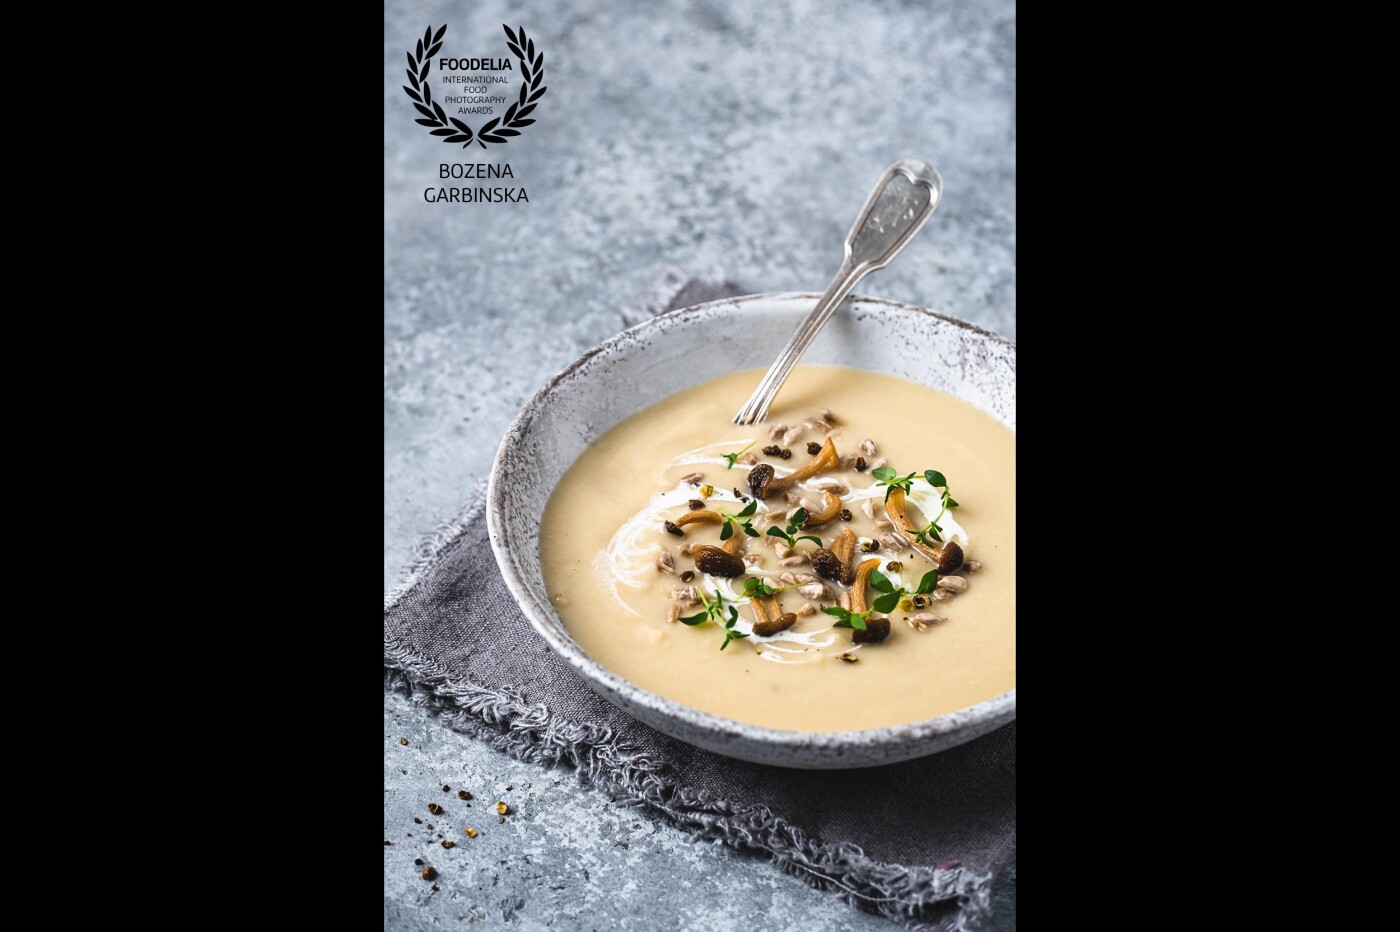 Parsnip soup with shimeji<br />
Camera: Fuji X-T3<br />
Lens: Fujinon 80mm<br />
Settings: ISO 160, 40mm, 1/10s, f/5.0<br />
Shot with artificial light